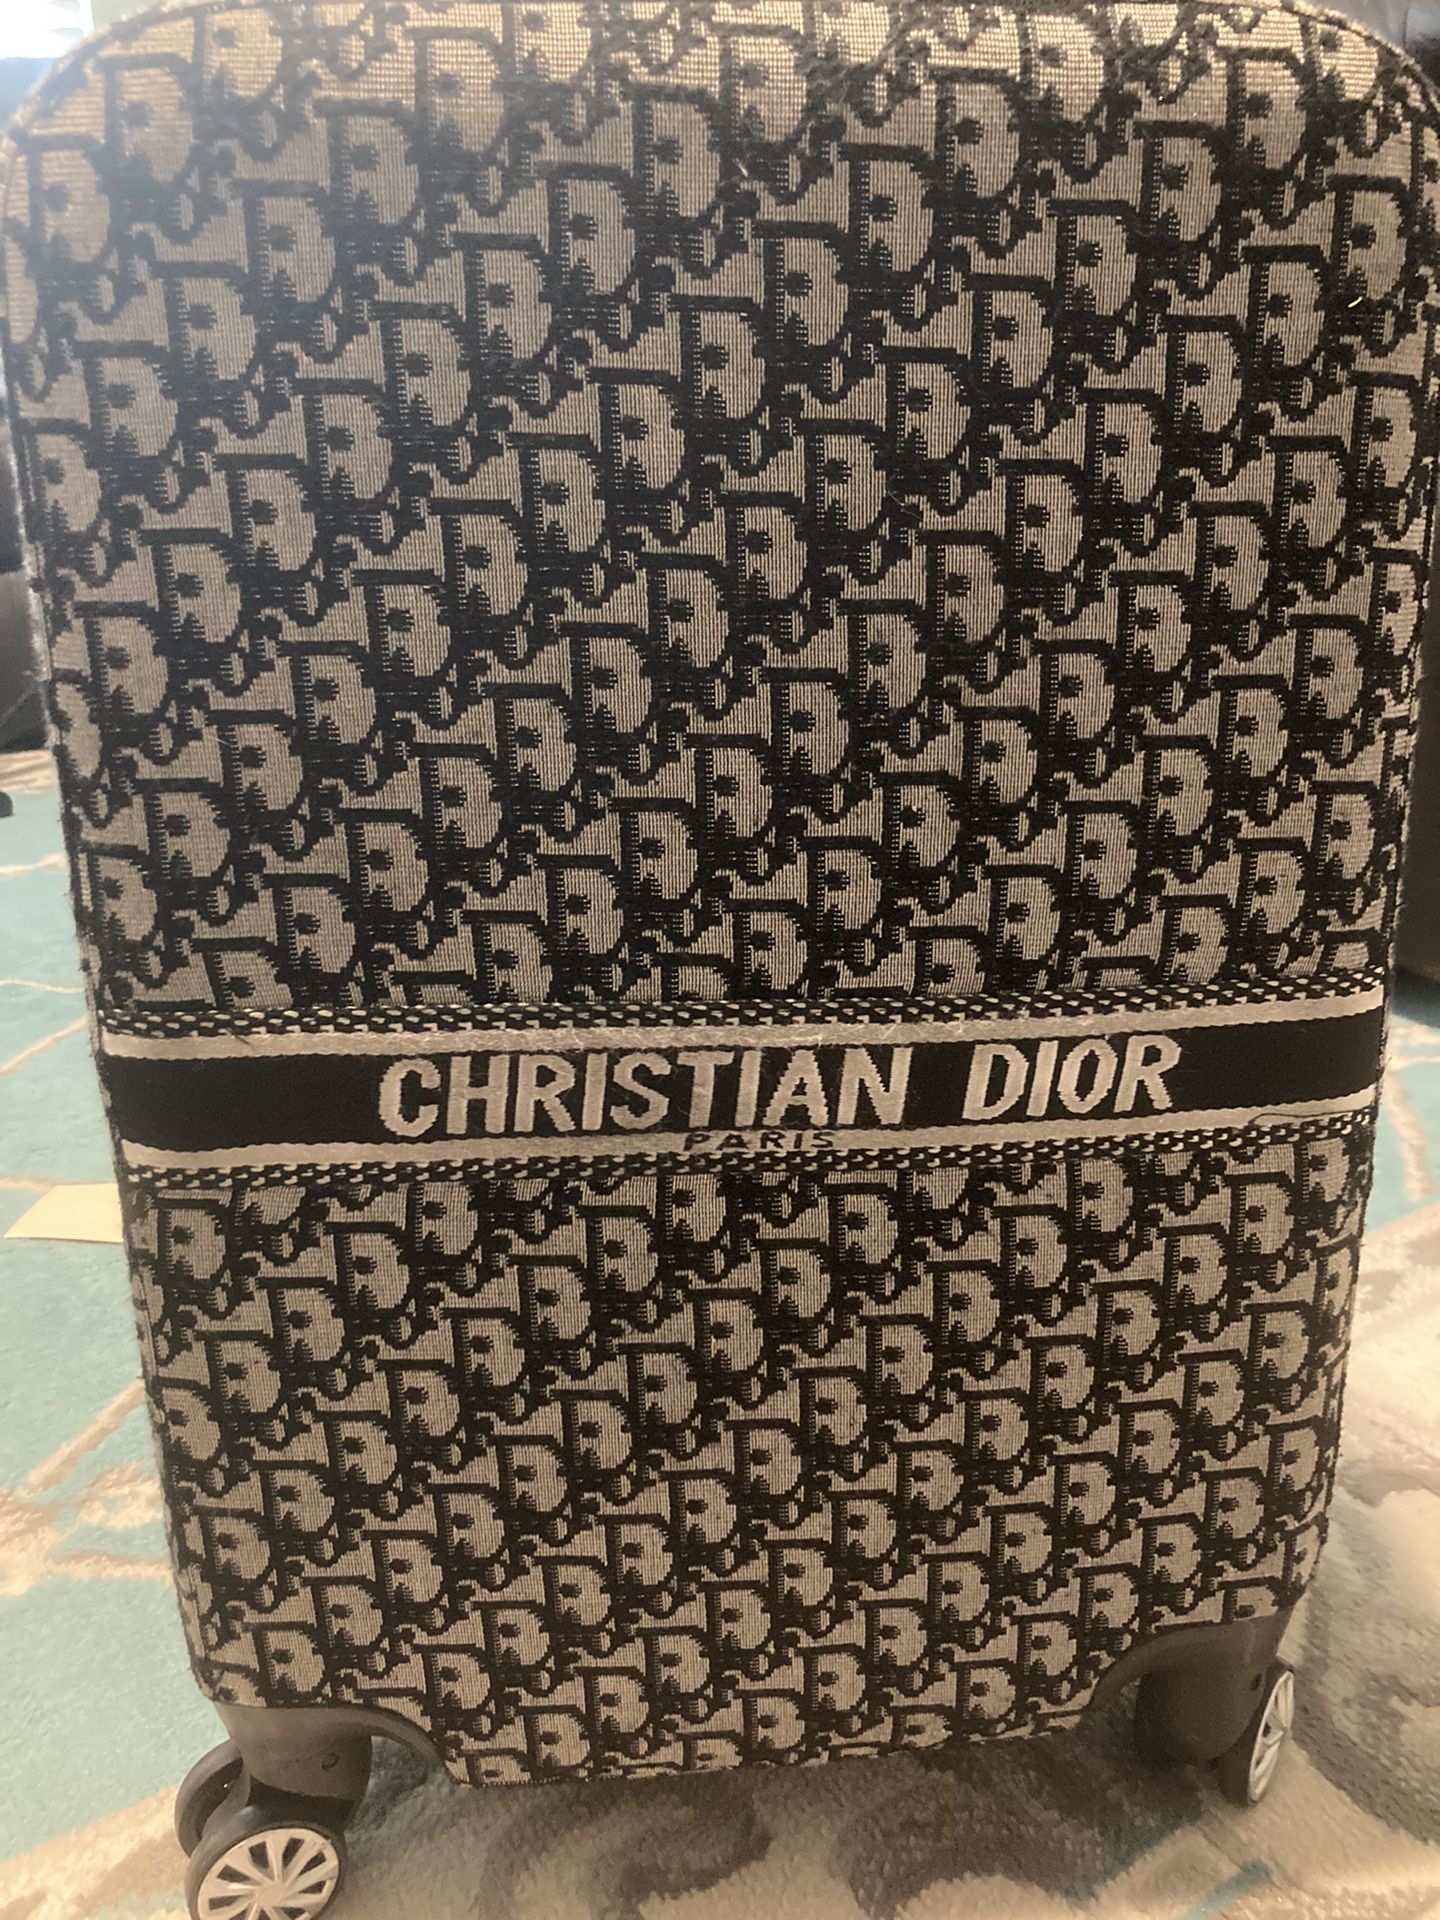 Dior Travel Luggage for sale